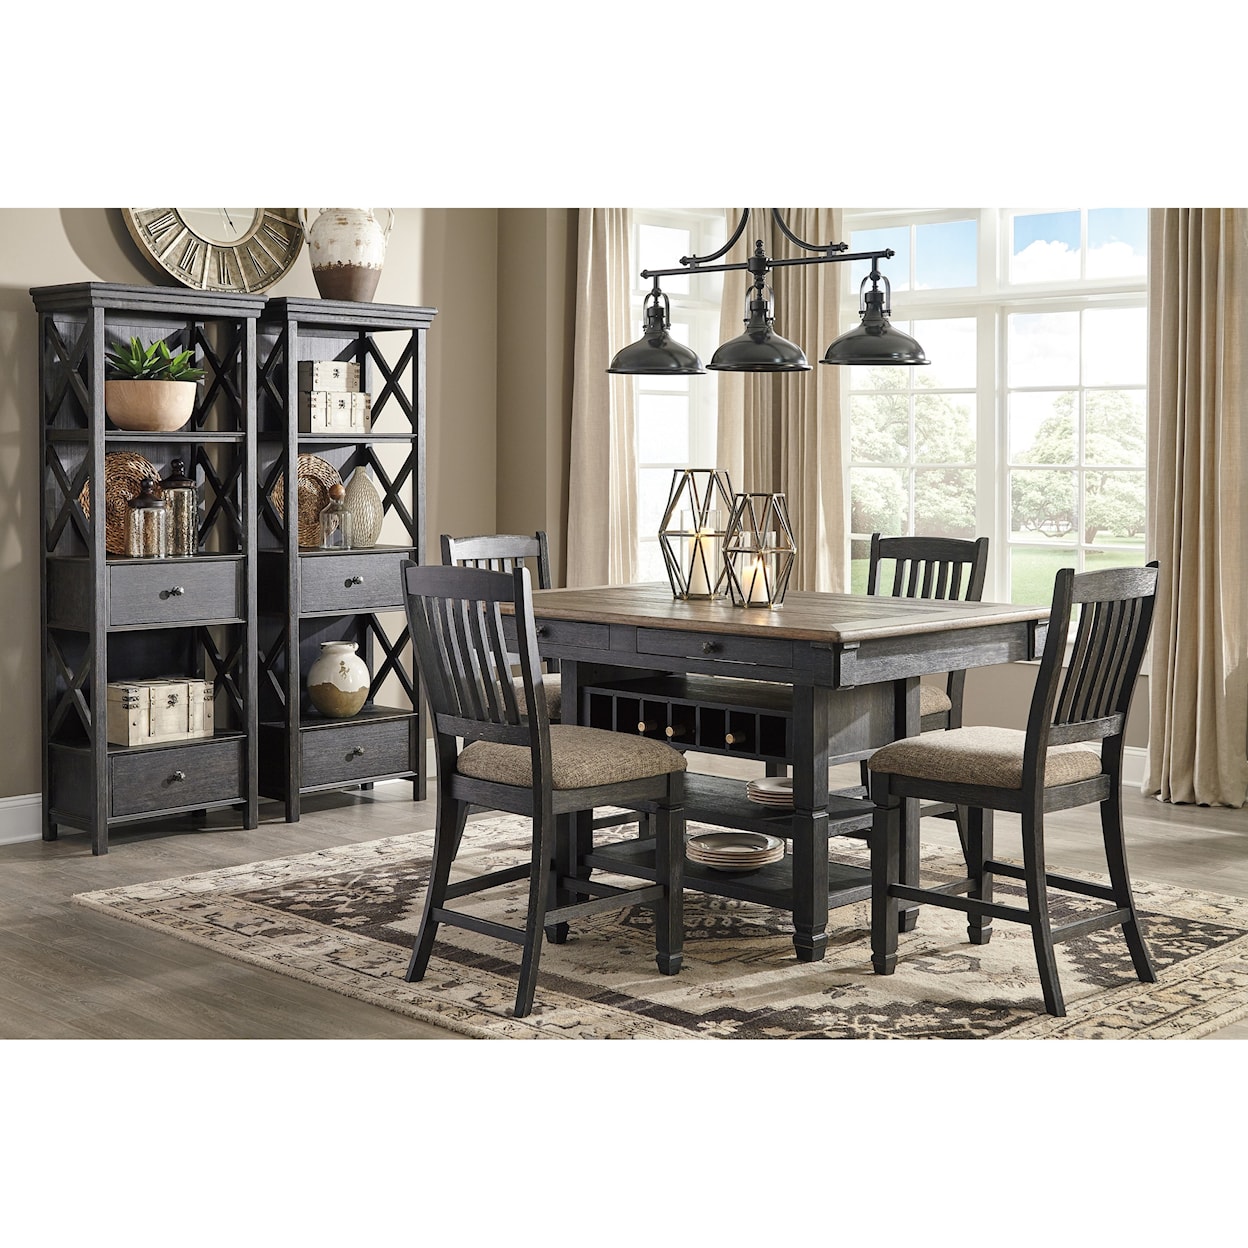 Signature Design Tyler Creek Casual Dining Room Group